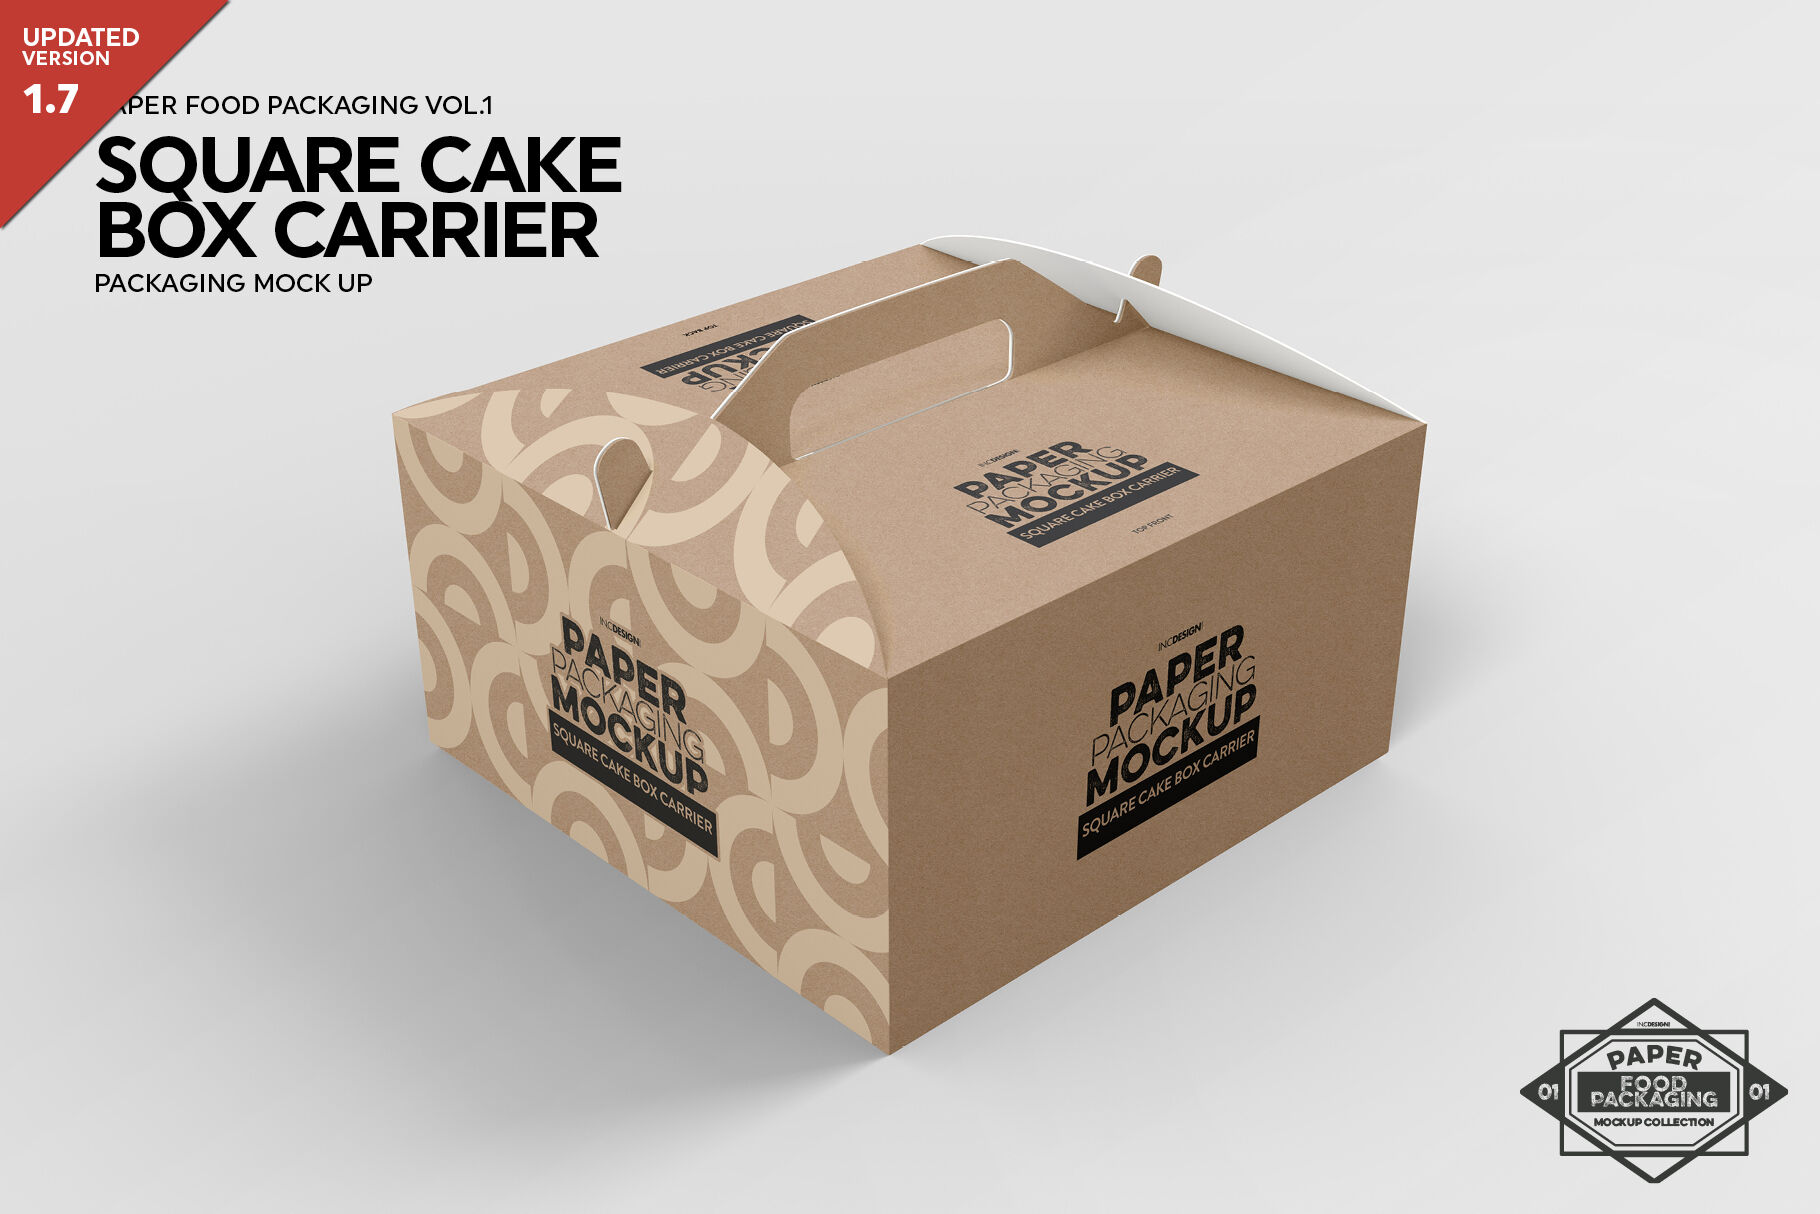 Download Cake Packaging Mockup Download Free And Premium Psd Mockup Templates And Design Assets PSD Mockup Templates